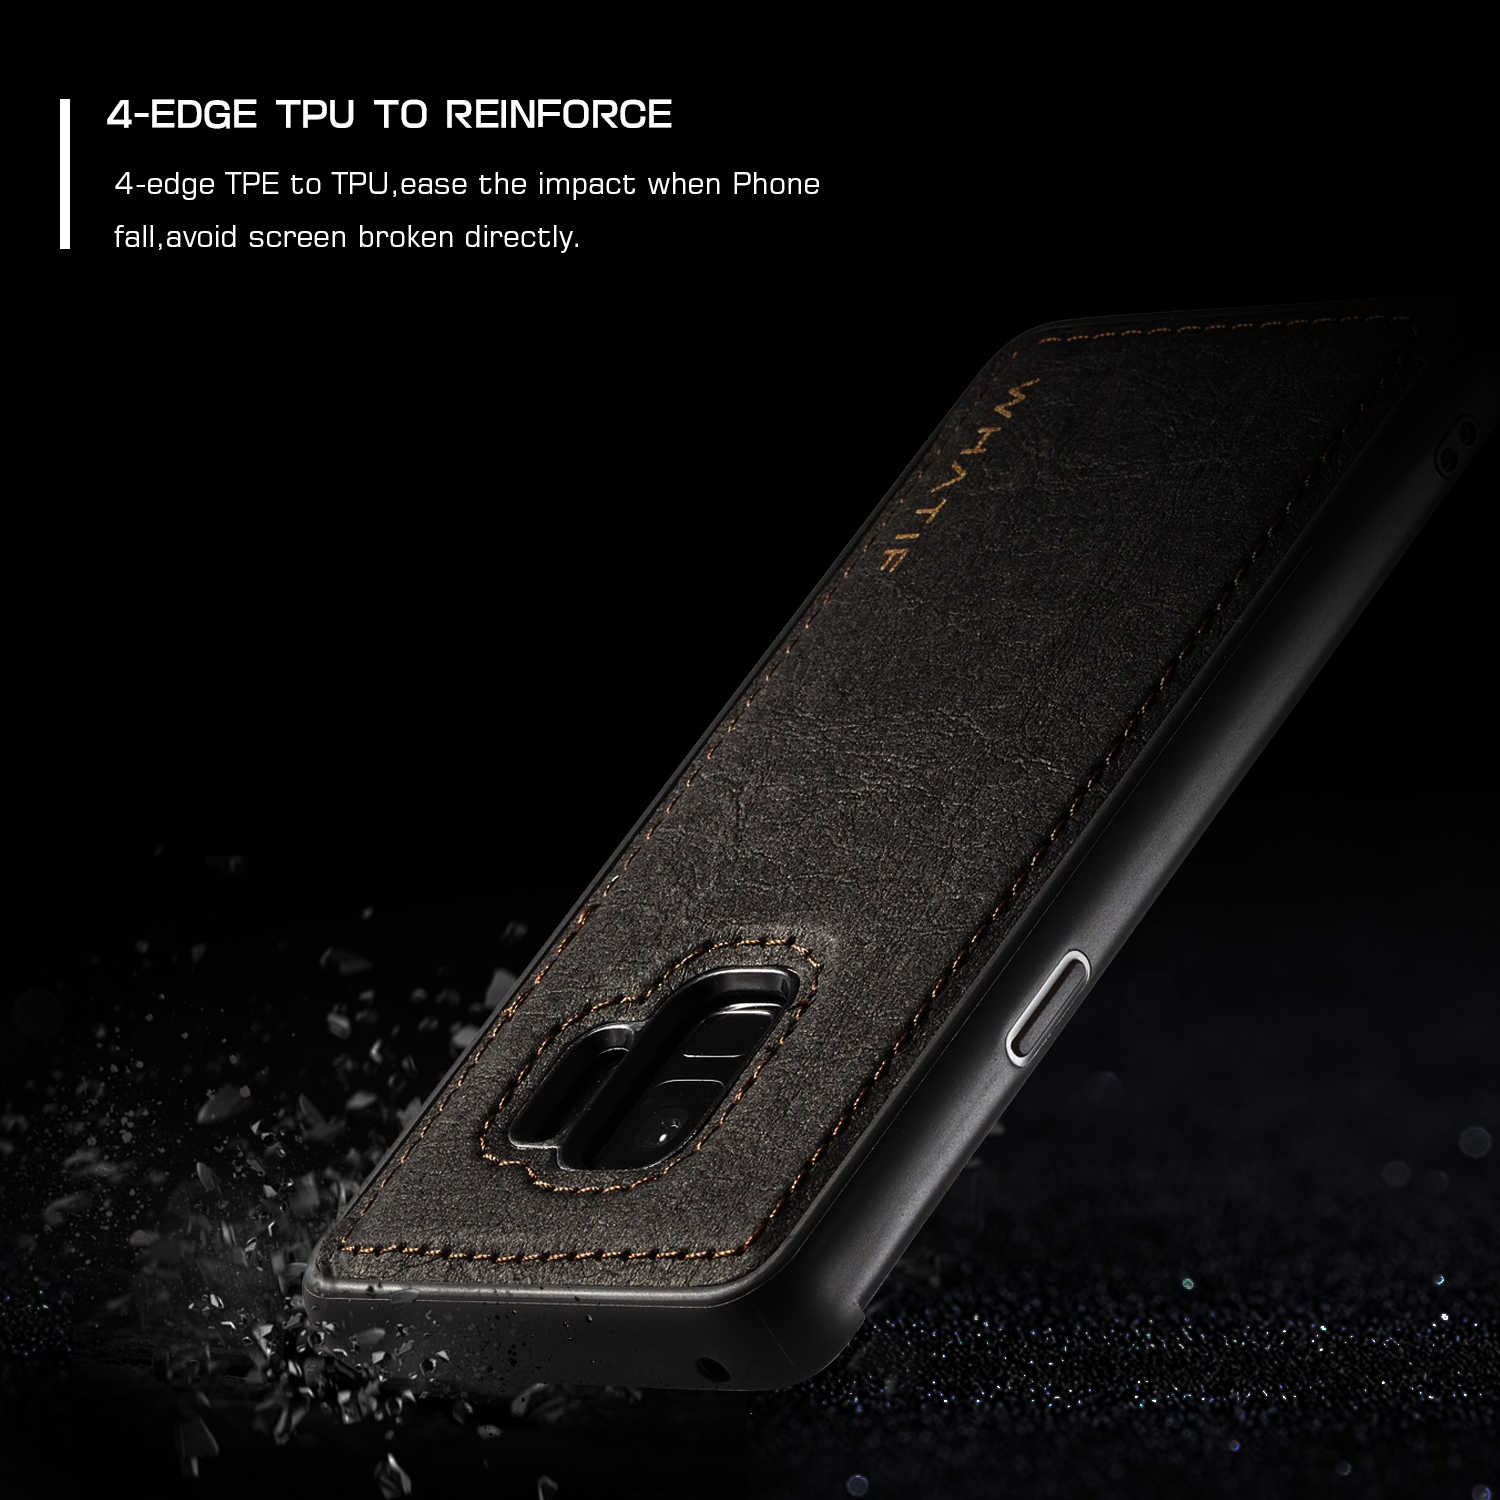 WHATIF-Waterproof-Shockproof-Protective-Case-For-Samsung-Galaxy-S9-1286565-4